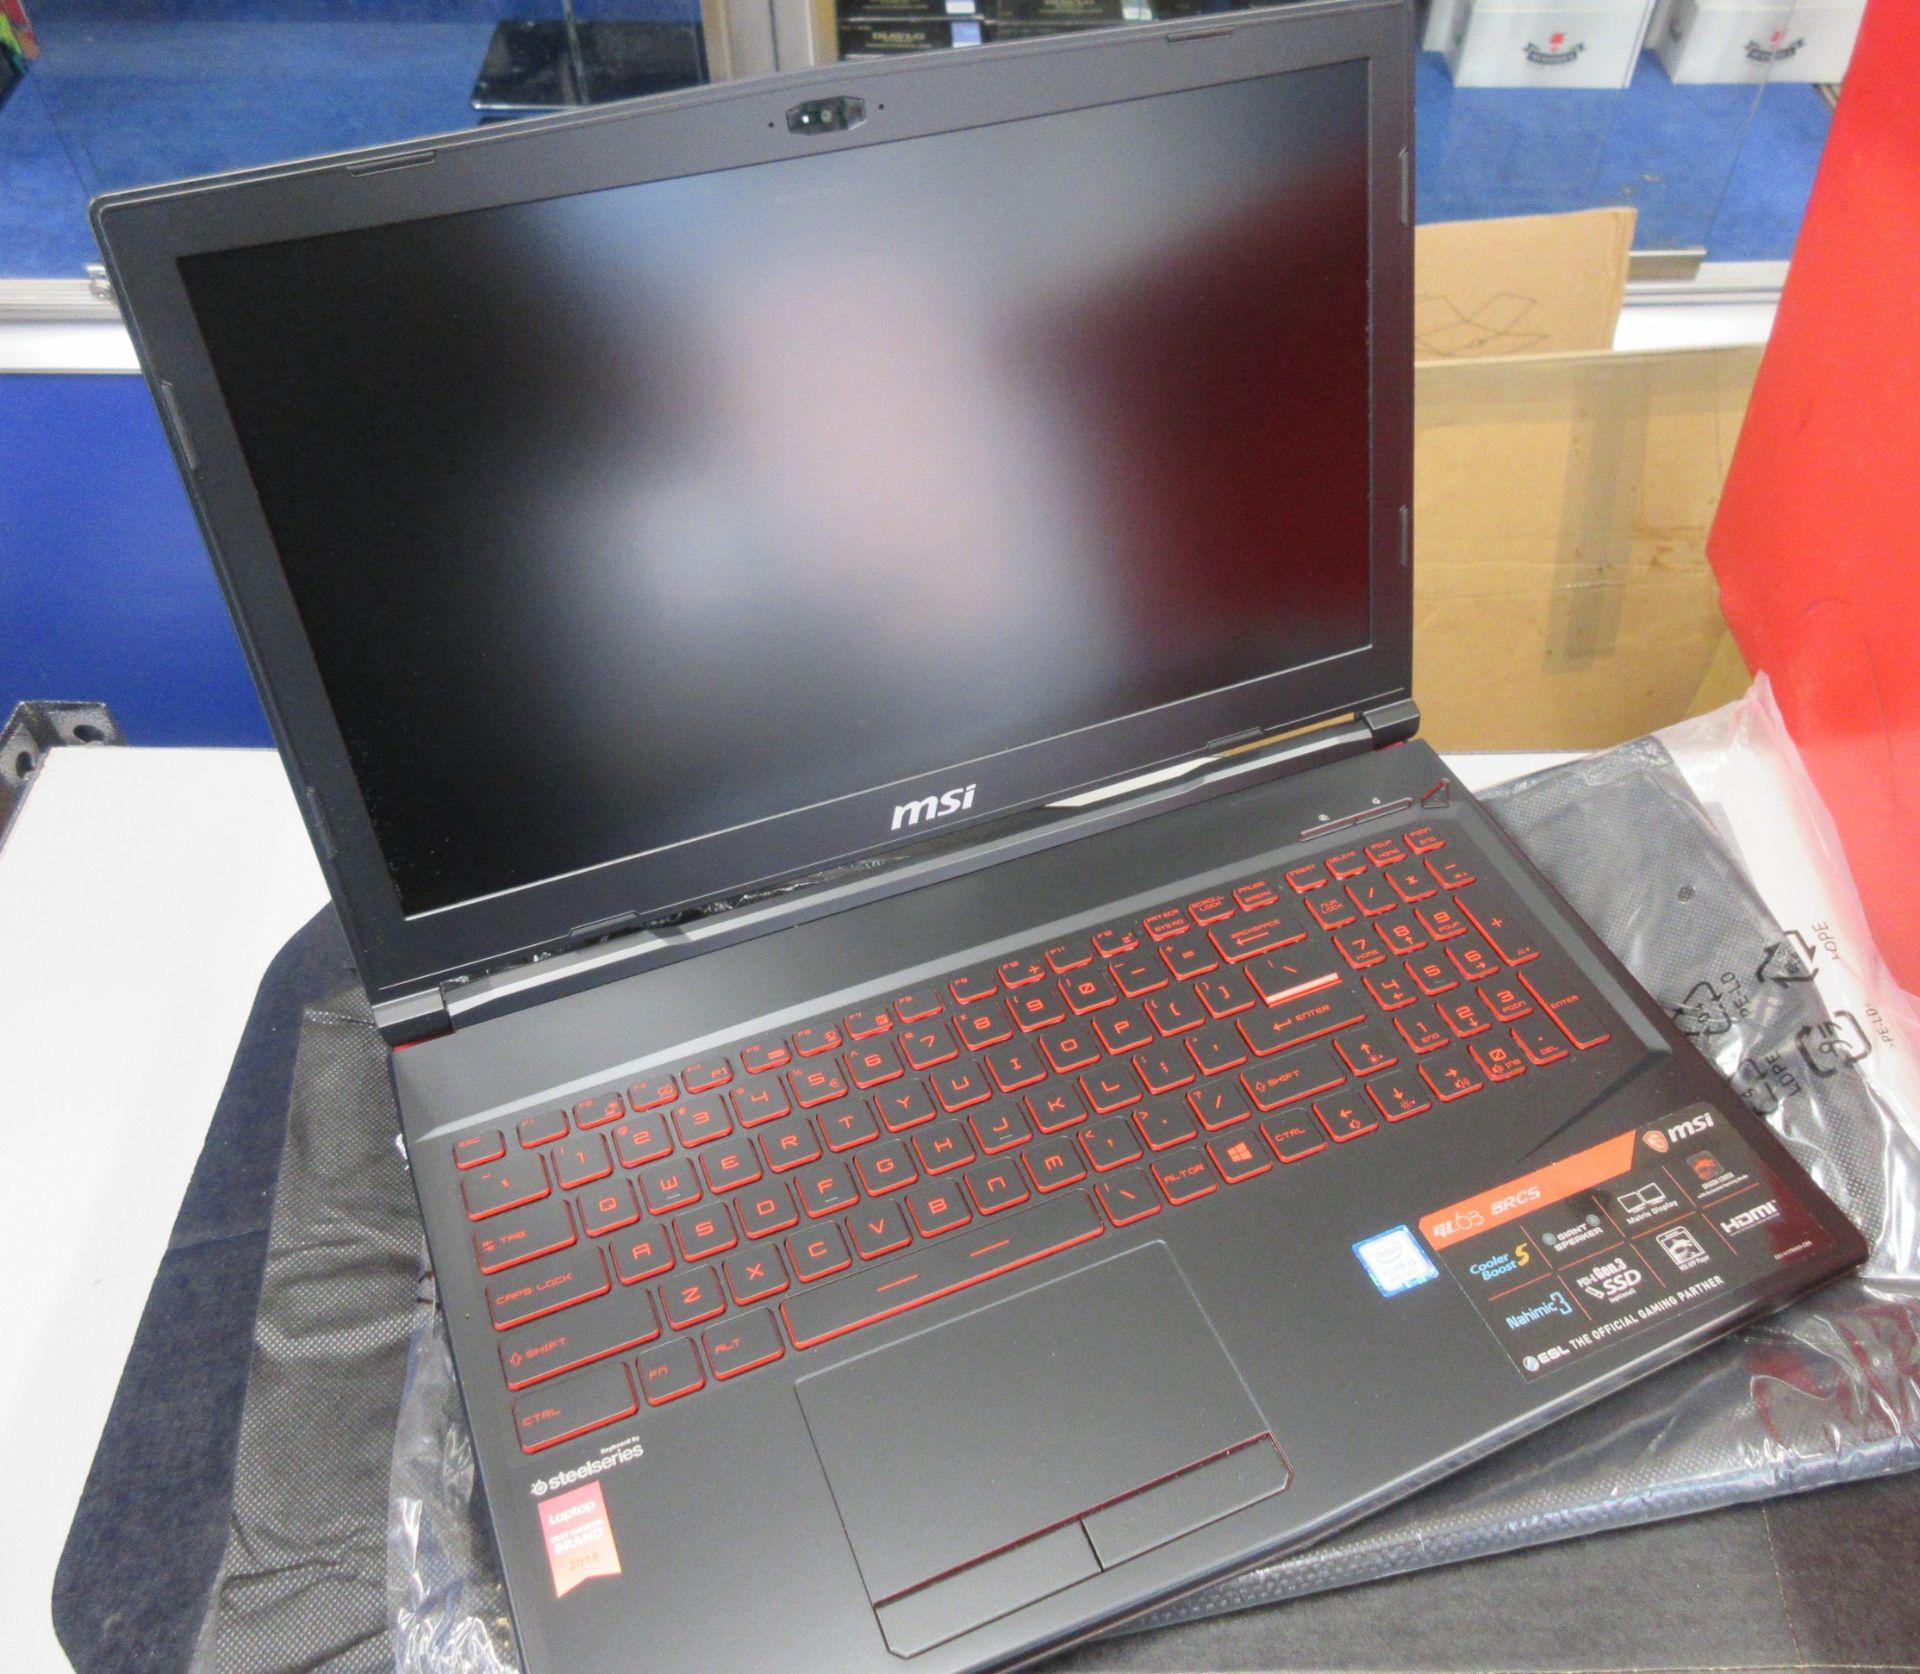 A pre-owned MSI GL63 8RCS-060 15.6" Gaming Laptop with Intel Core i5-8300H Processor, NVIDIA GTX